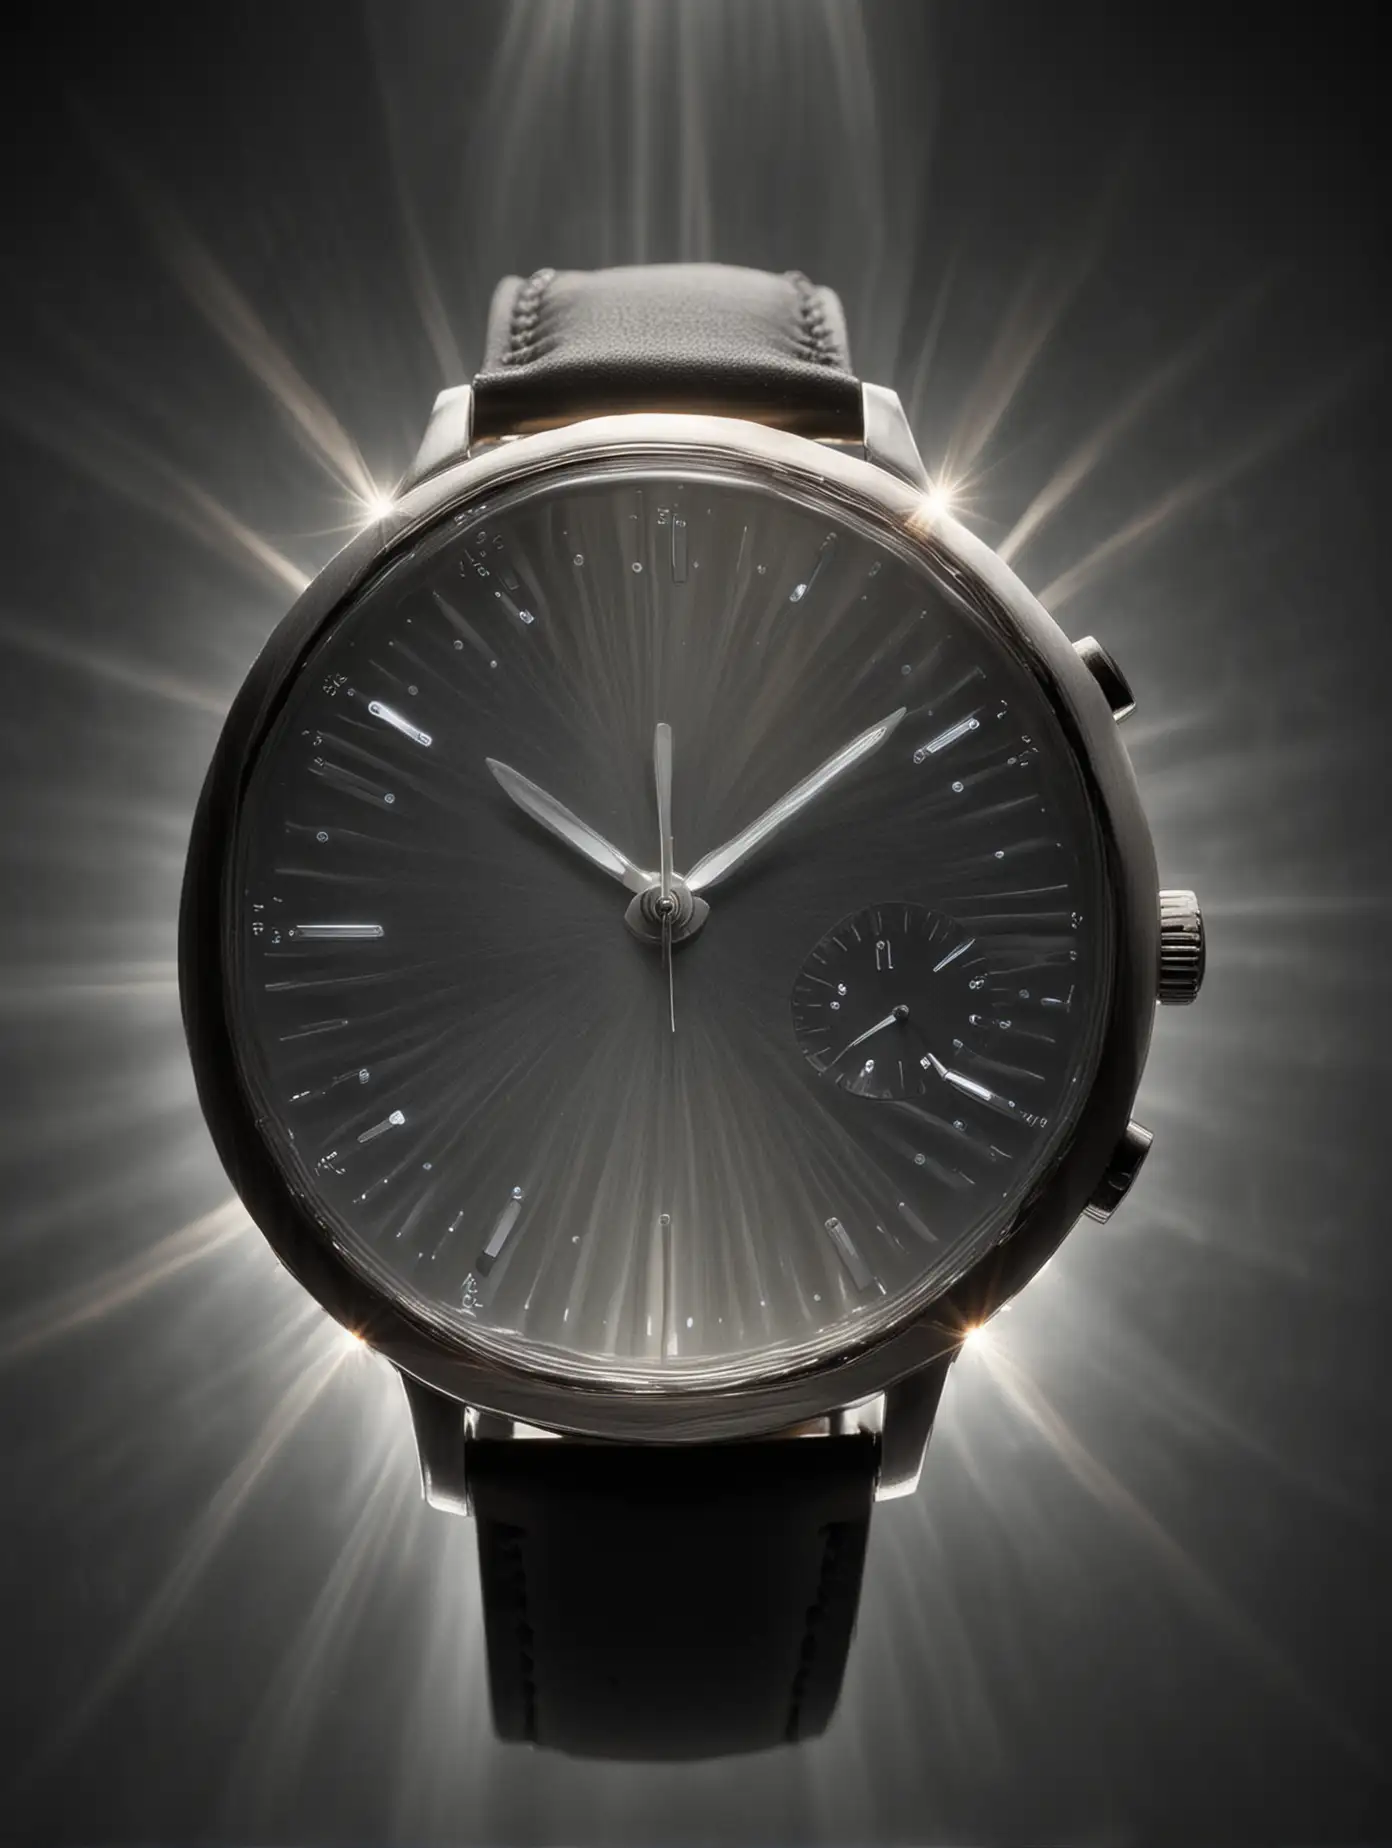 perfectly round Watch with rays of light coming off of it